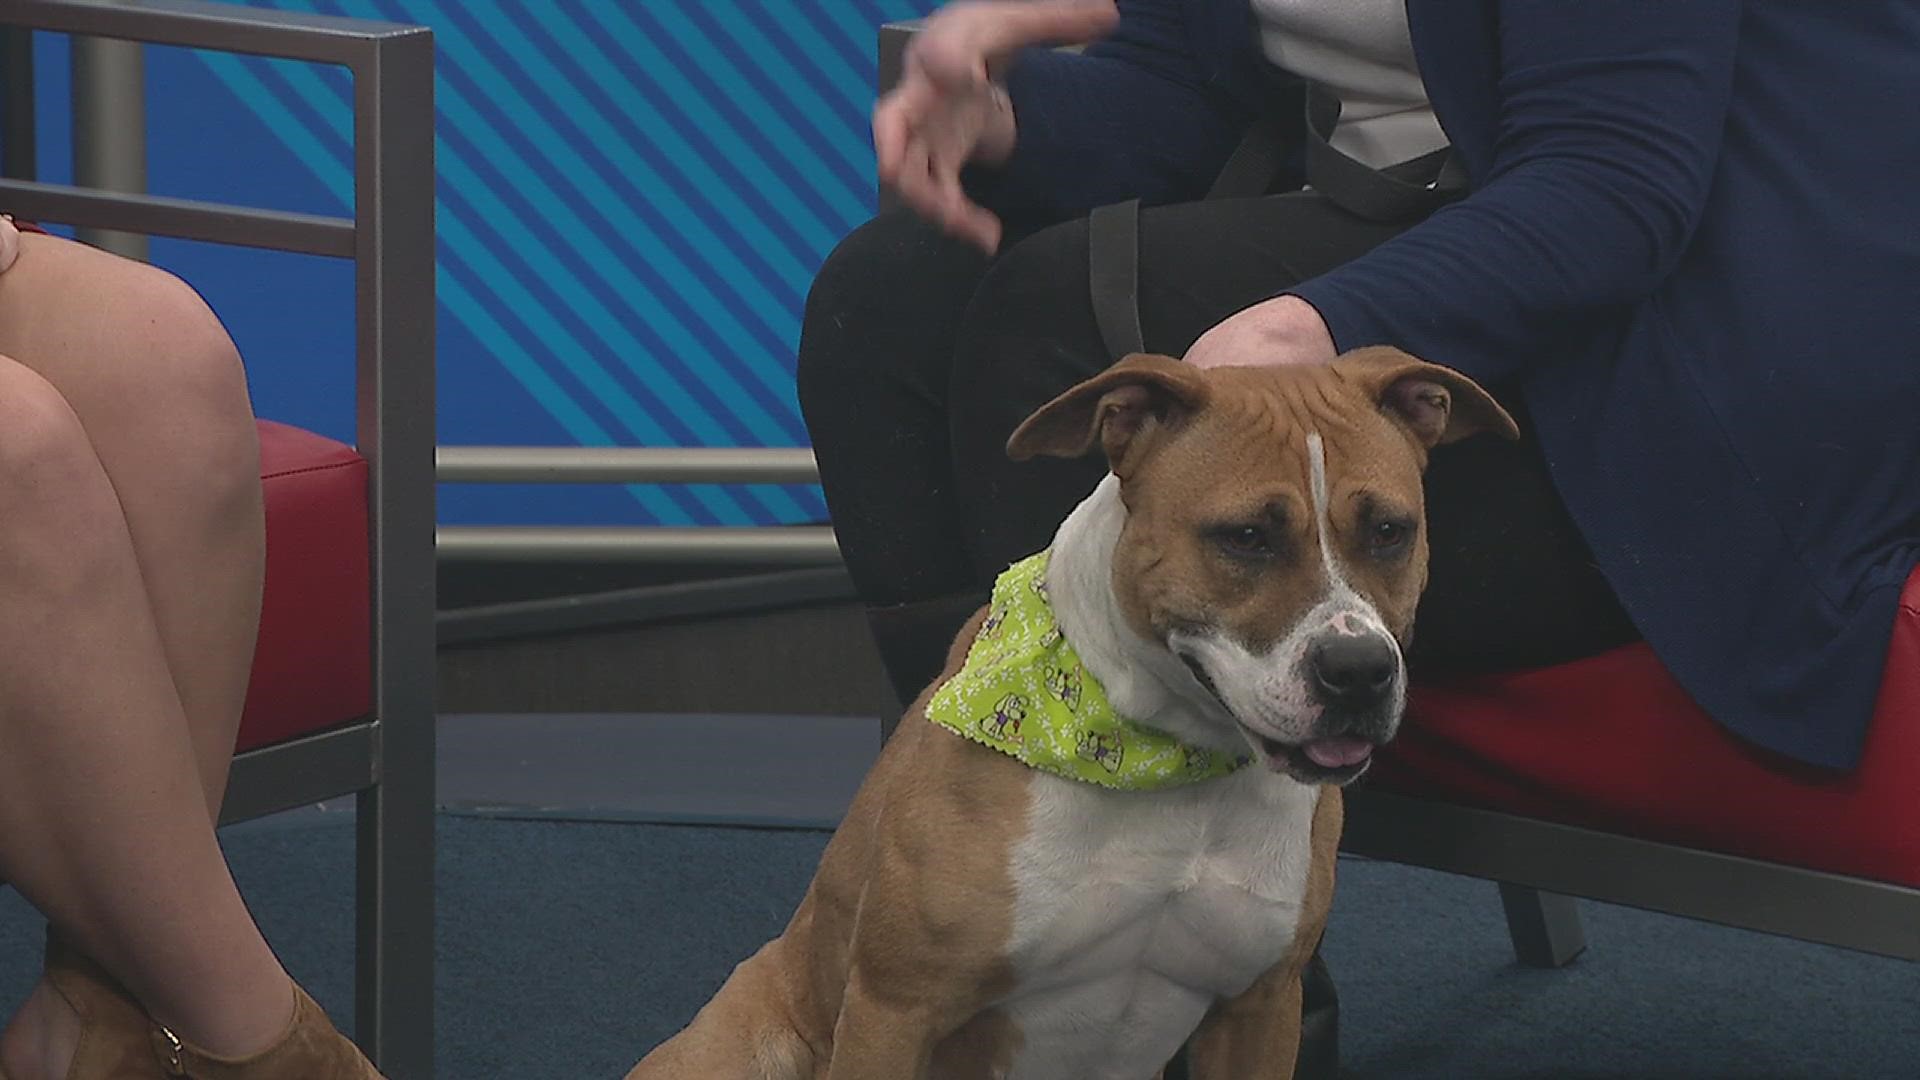 Patti McRae with the Quad City Animal Welfare Center joins us with Sioux, our pet of the week! This good girl is a three-year-old spayed female Pit Bull mix.